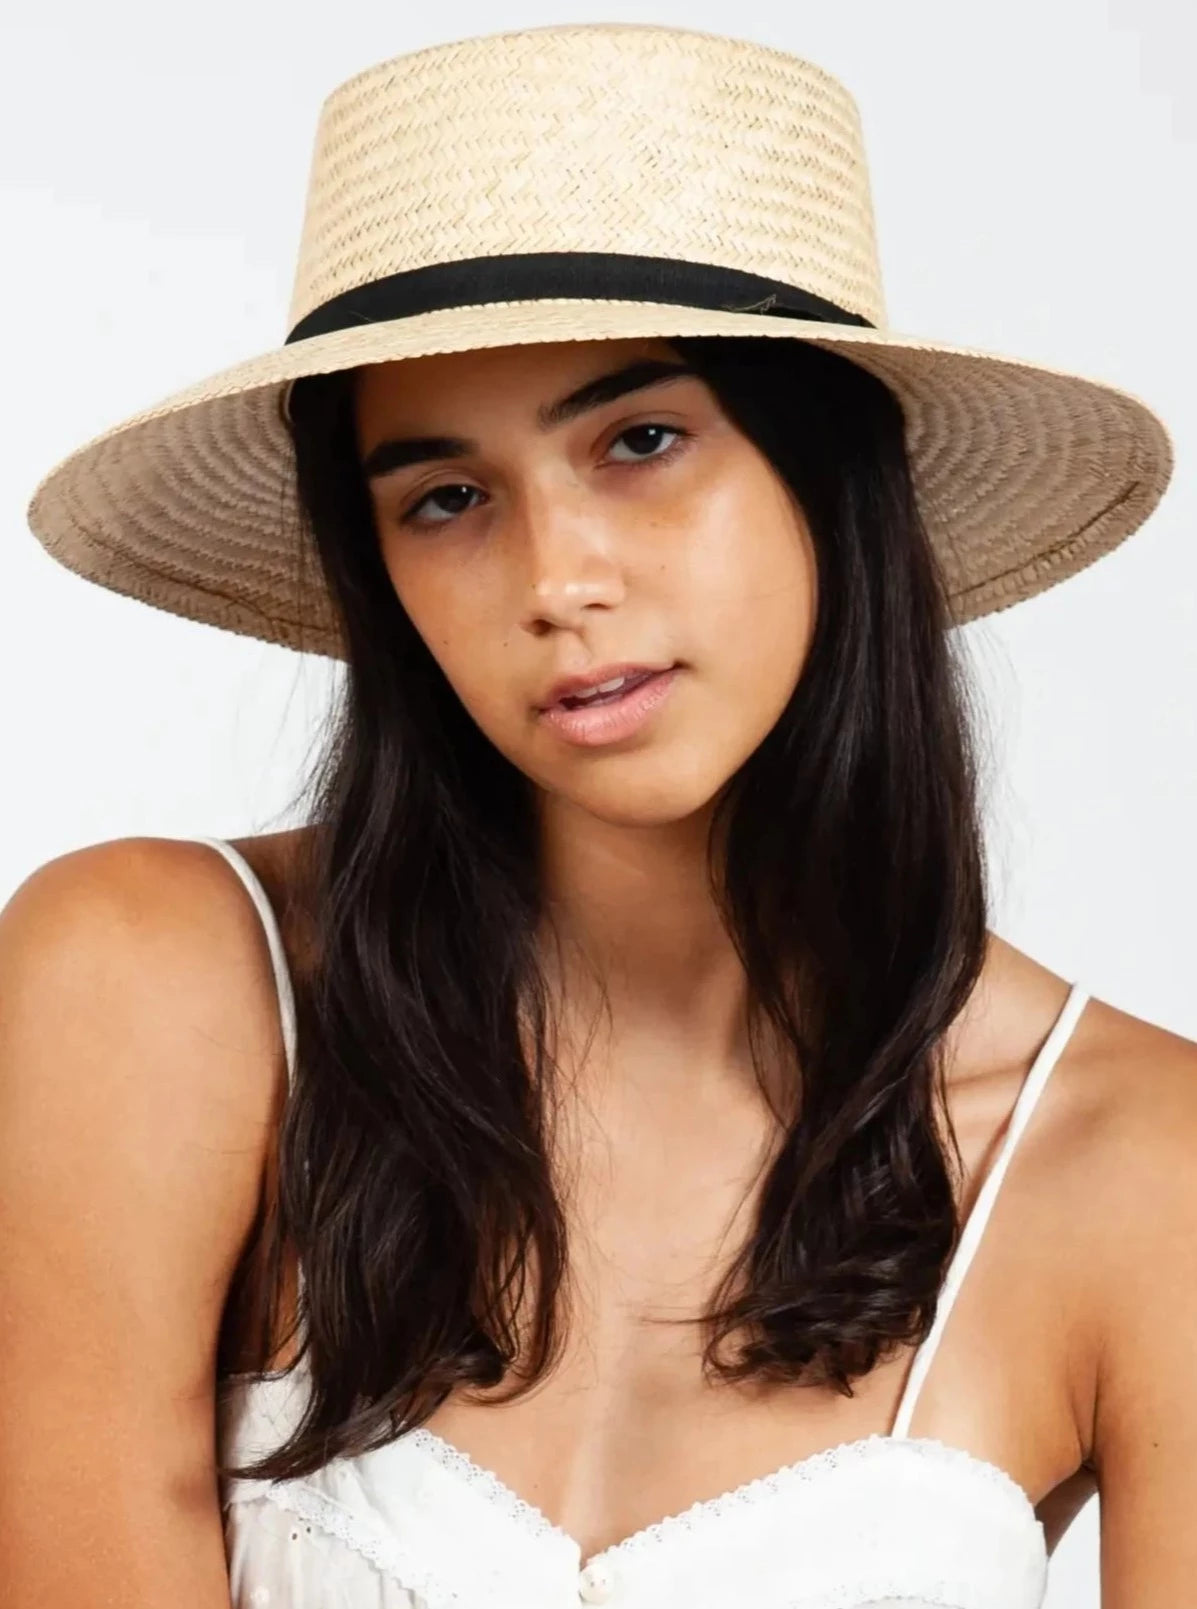 WOVEN STRAW HAT